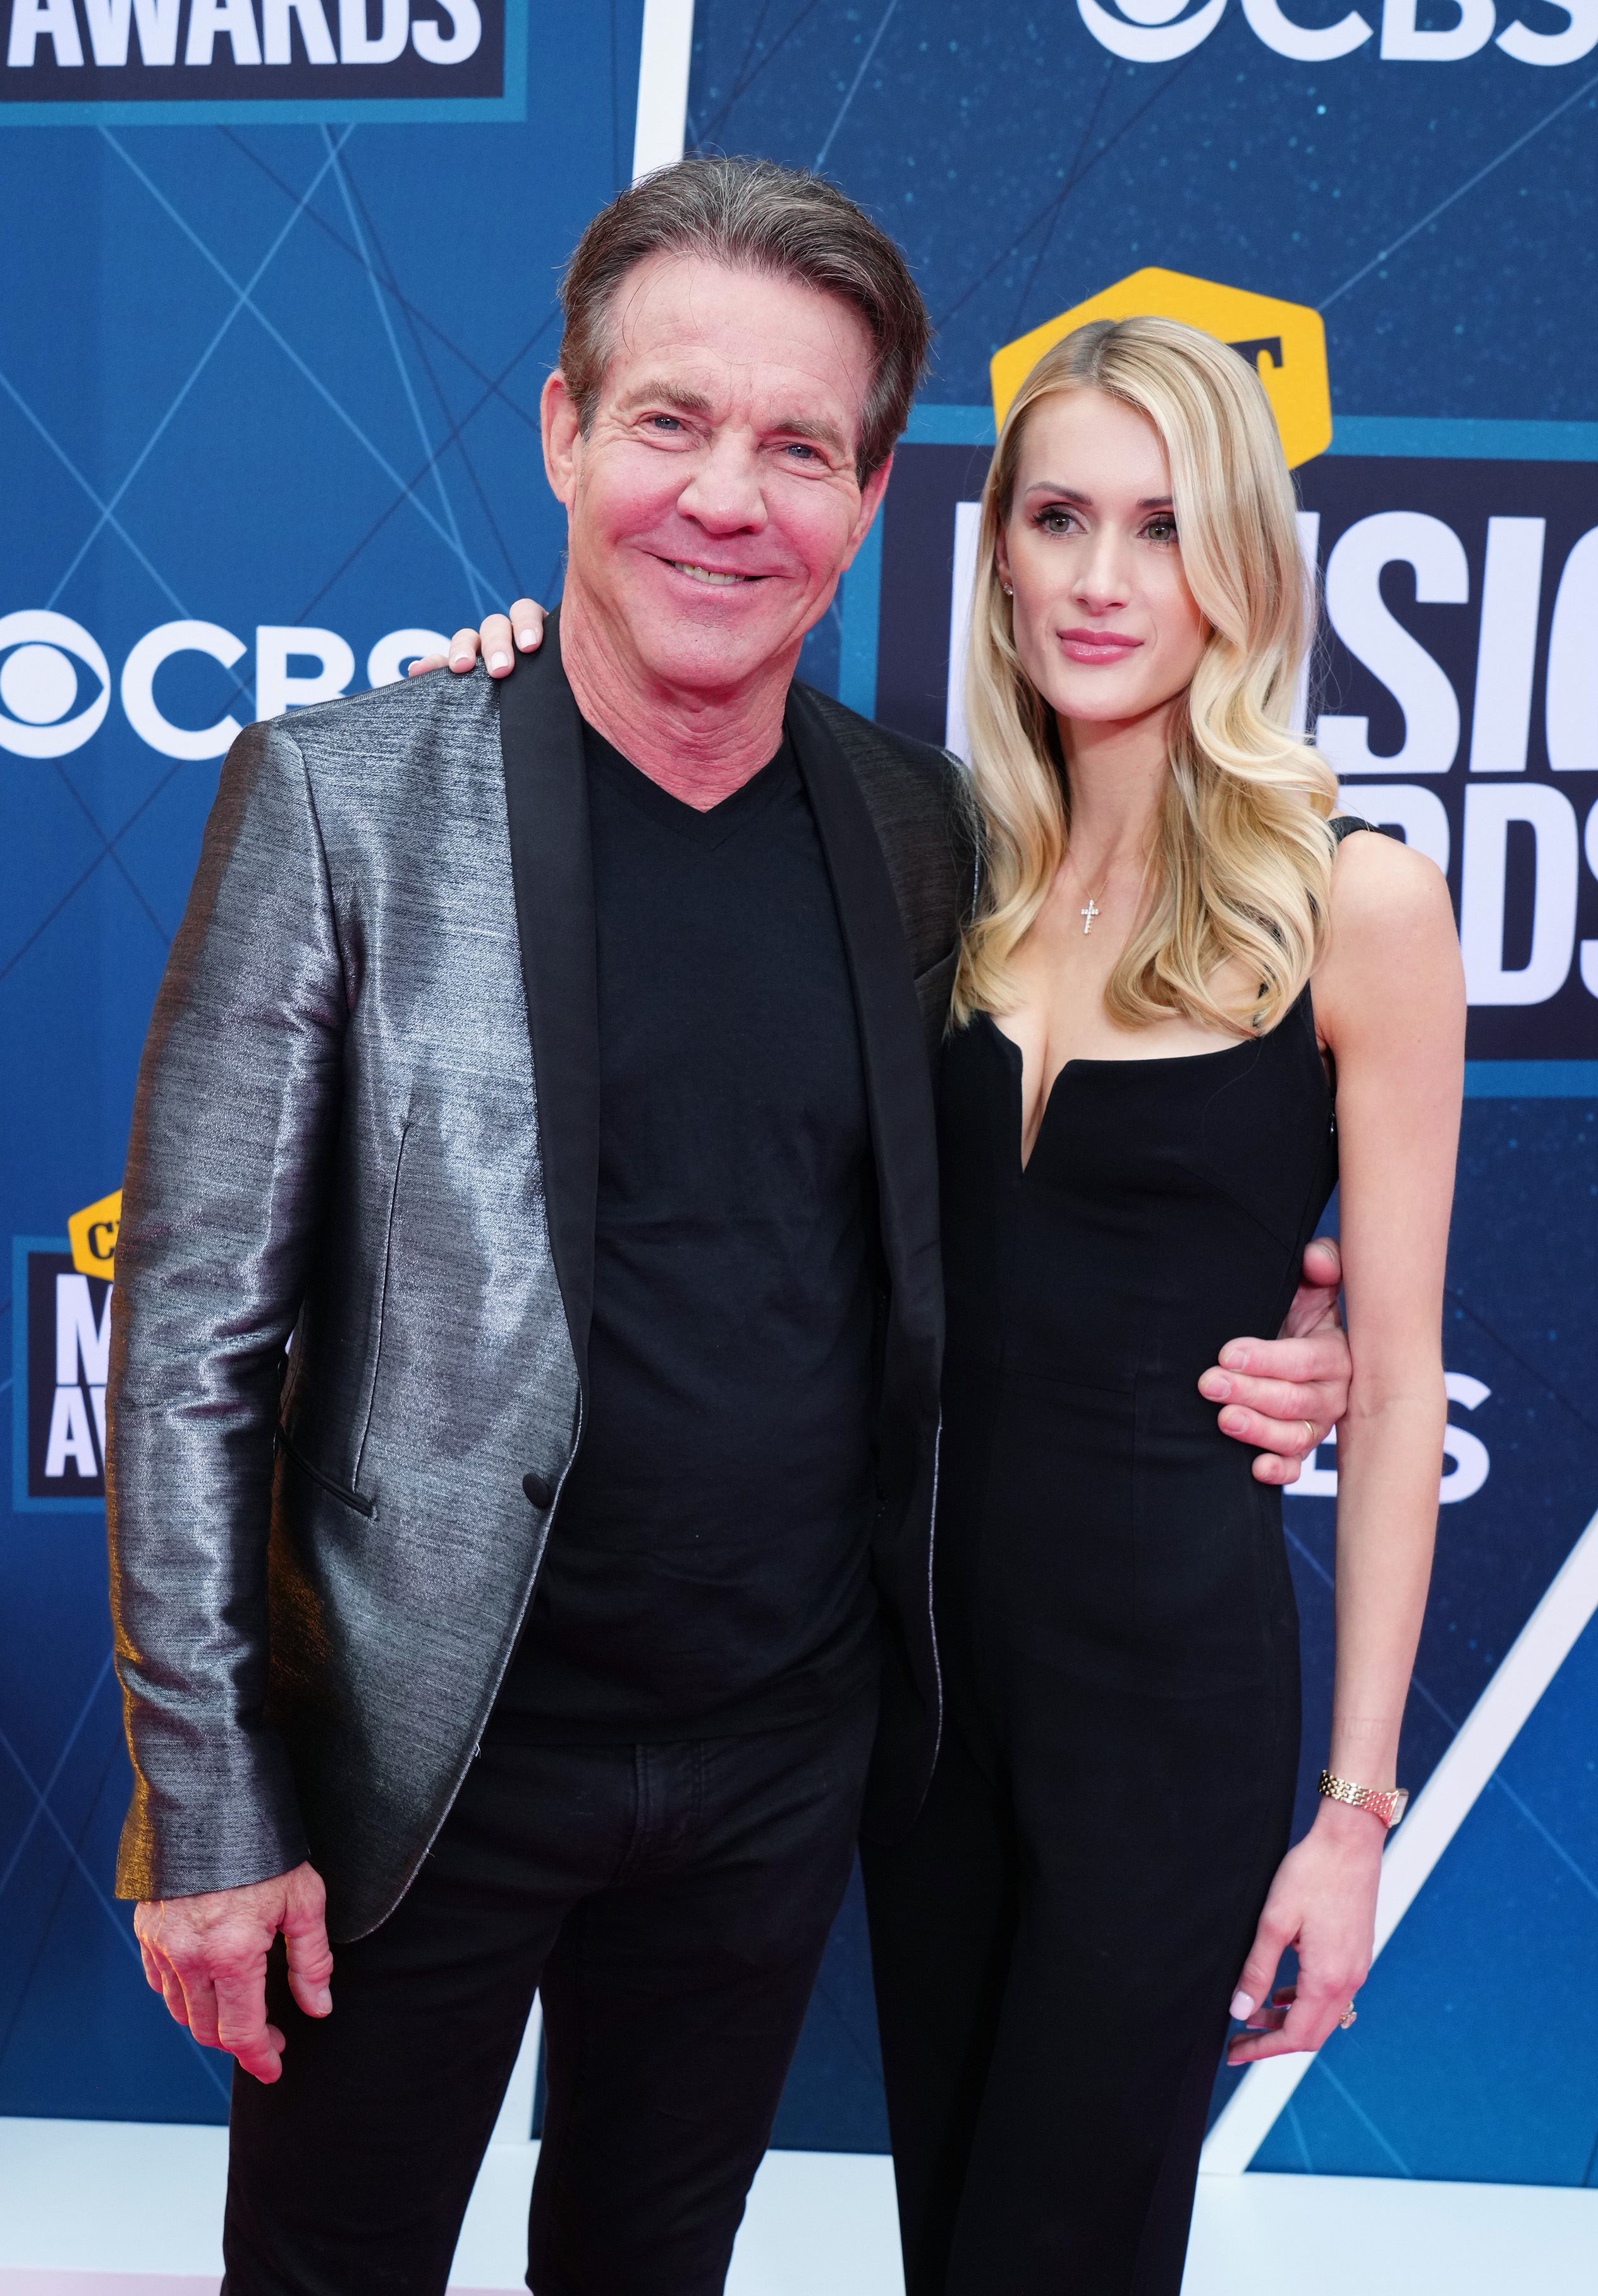 <p><a href="https://www.wonderwall.com/celebrity/profiles/overview/dennis-quaid-1083.article">Dennis Quaid</a>'s fourth wife, Laura Savoie, is 39 years his junior. The actor -- seen here with Laura at the <a href="https://www.wonderwall.com/awards-events/a-lightning-storm-couldnt-stop-these-stars-see-all-the-big-names-braving-the-bad-weather-at-the-2022-cmt-music-awards-585190.gallery">2022 CMT Music Awards</a> -- was 65 when he was first photographed with the then-26-year-old graduate student in May 2019 (reports revealed they'd been dating for several months at the time). Dennis proposed in Hawaii in October 2019 and they married in June 2020. Laura, who was valedictorian of her class at Pepperdine University and previously dated actor Jeremy Piven, has been working toward her doctorate in accounting at the University of Texas at Austin, where she's a teaching and research assistant. But this isn't the first time Dennis has romanced a significantly younger woman... </p>